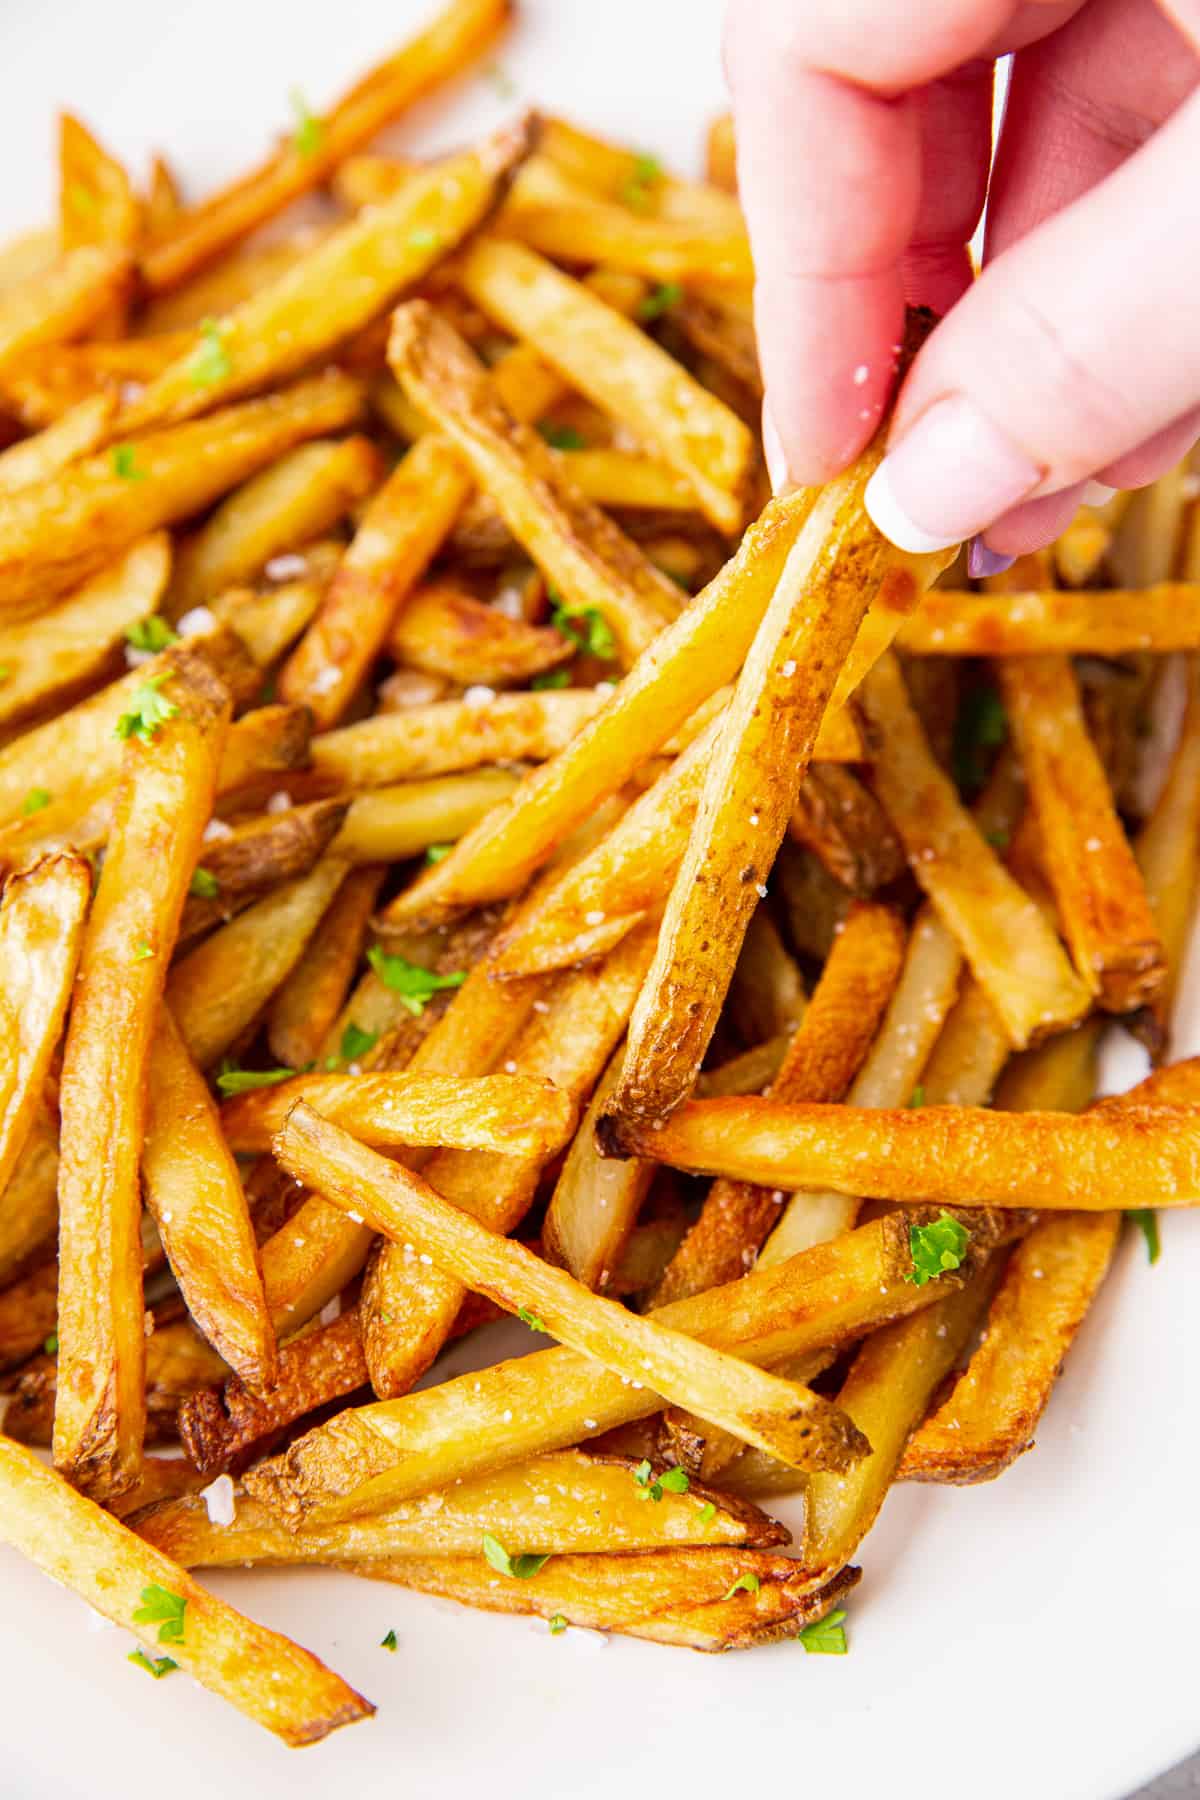 Fingers lifting french fries from a bowl.